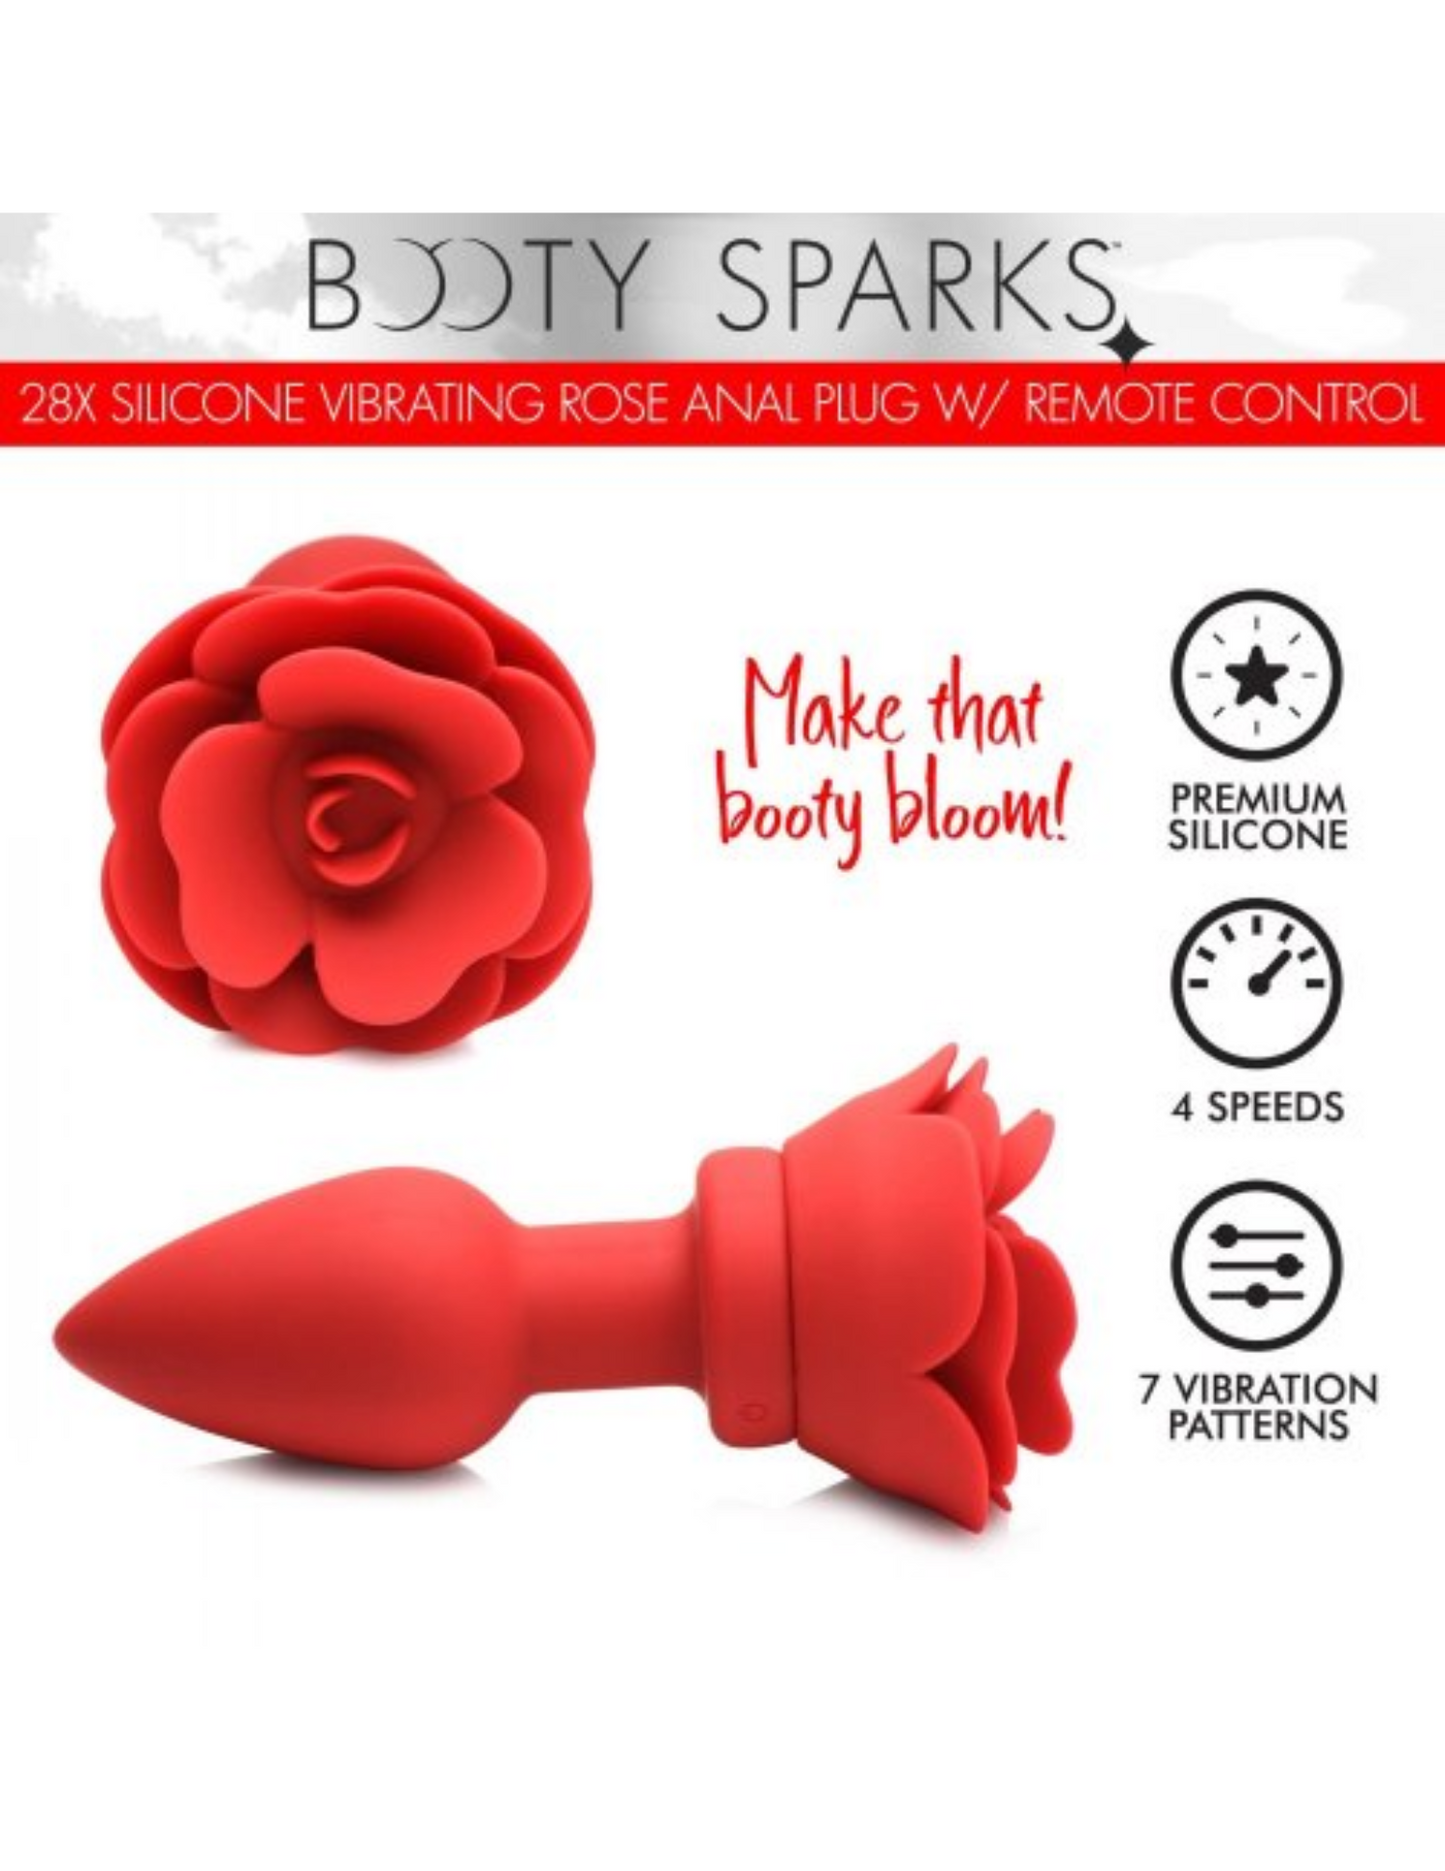 Image shows the rose bud of the plug and the side view of the plug. Also has symbols noting that the product is: made of premium silicone, has 4 speeds, and 7 vibration patterns.